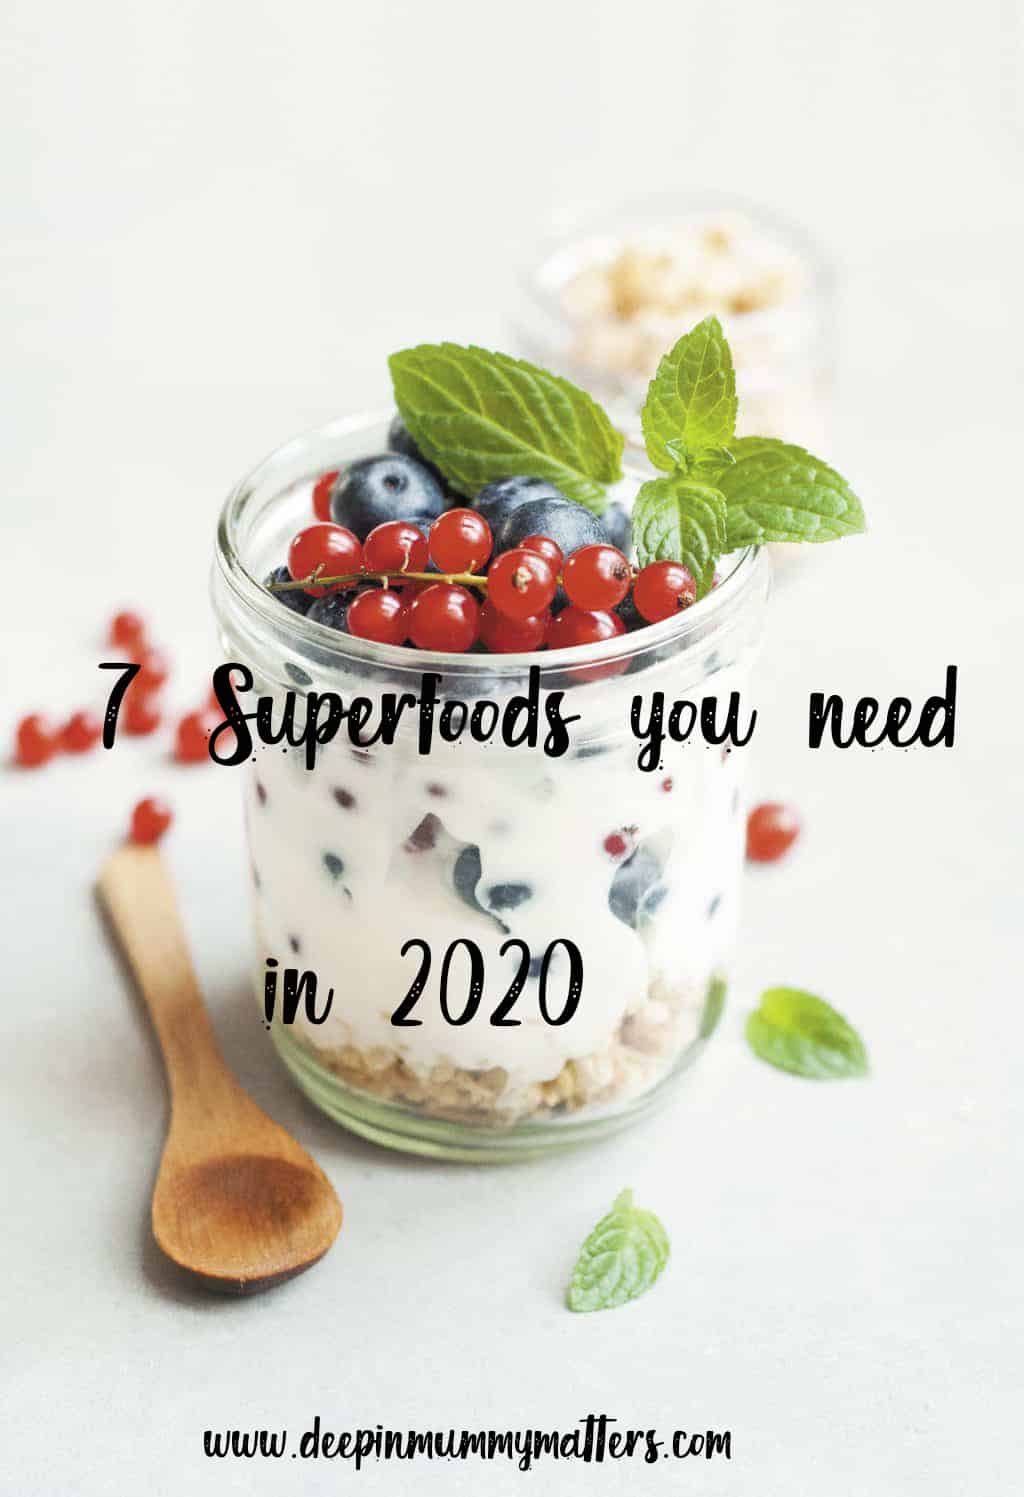 Superfoods you need in 2020